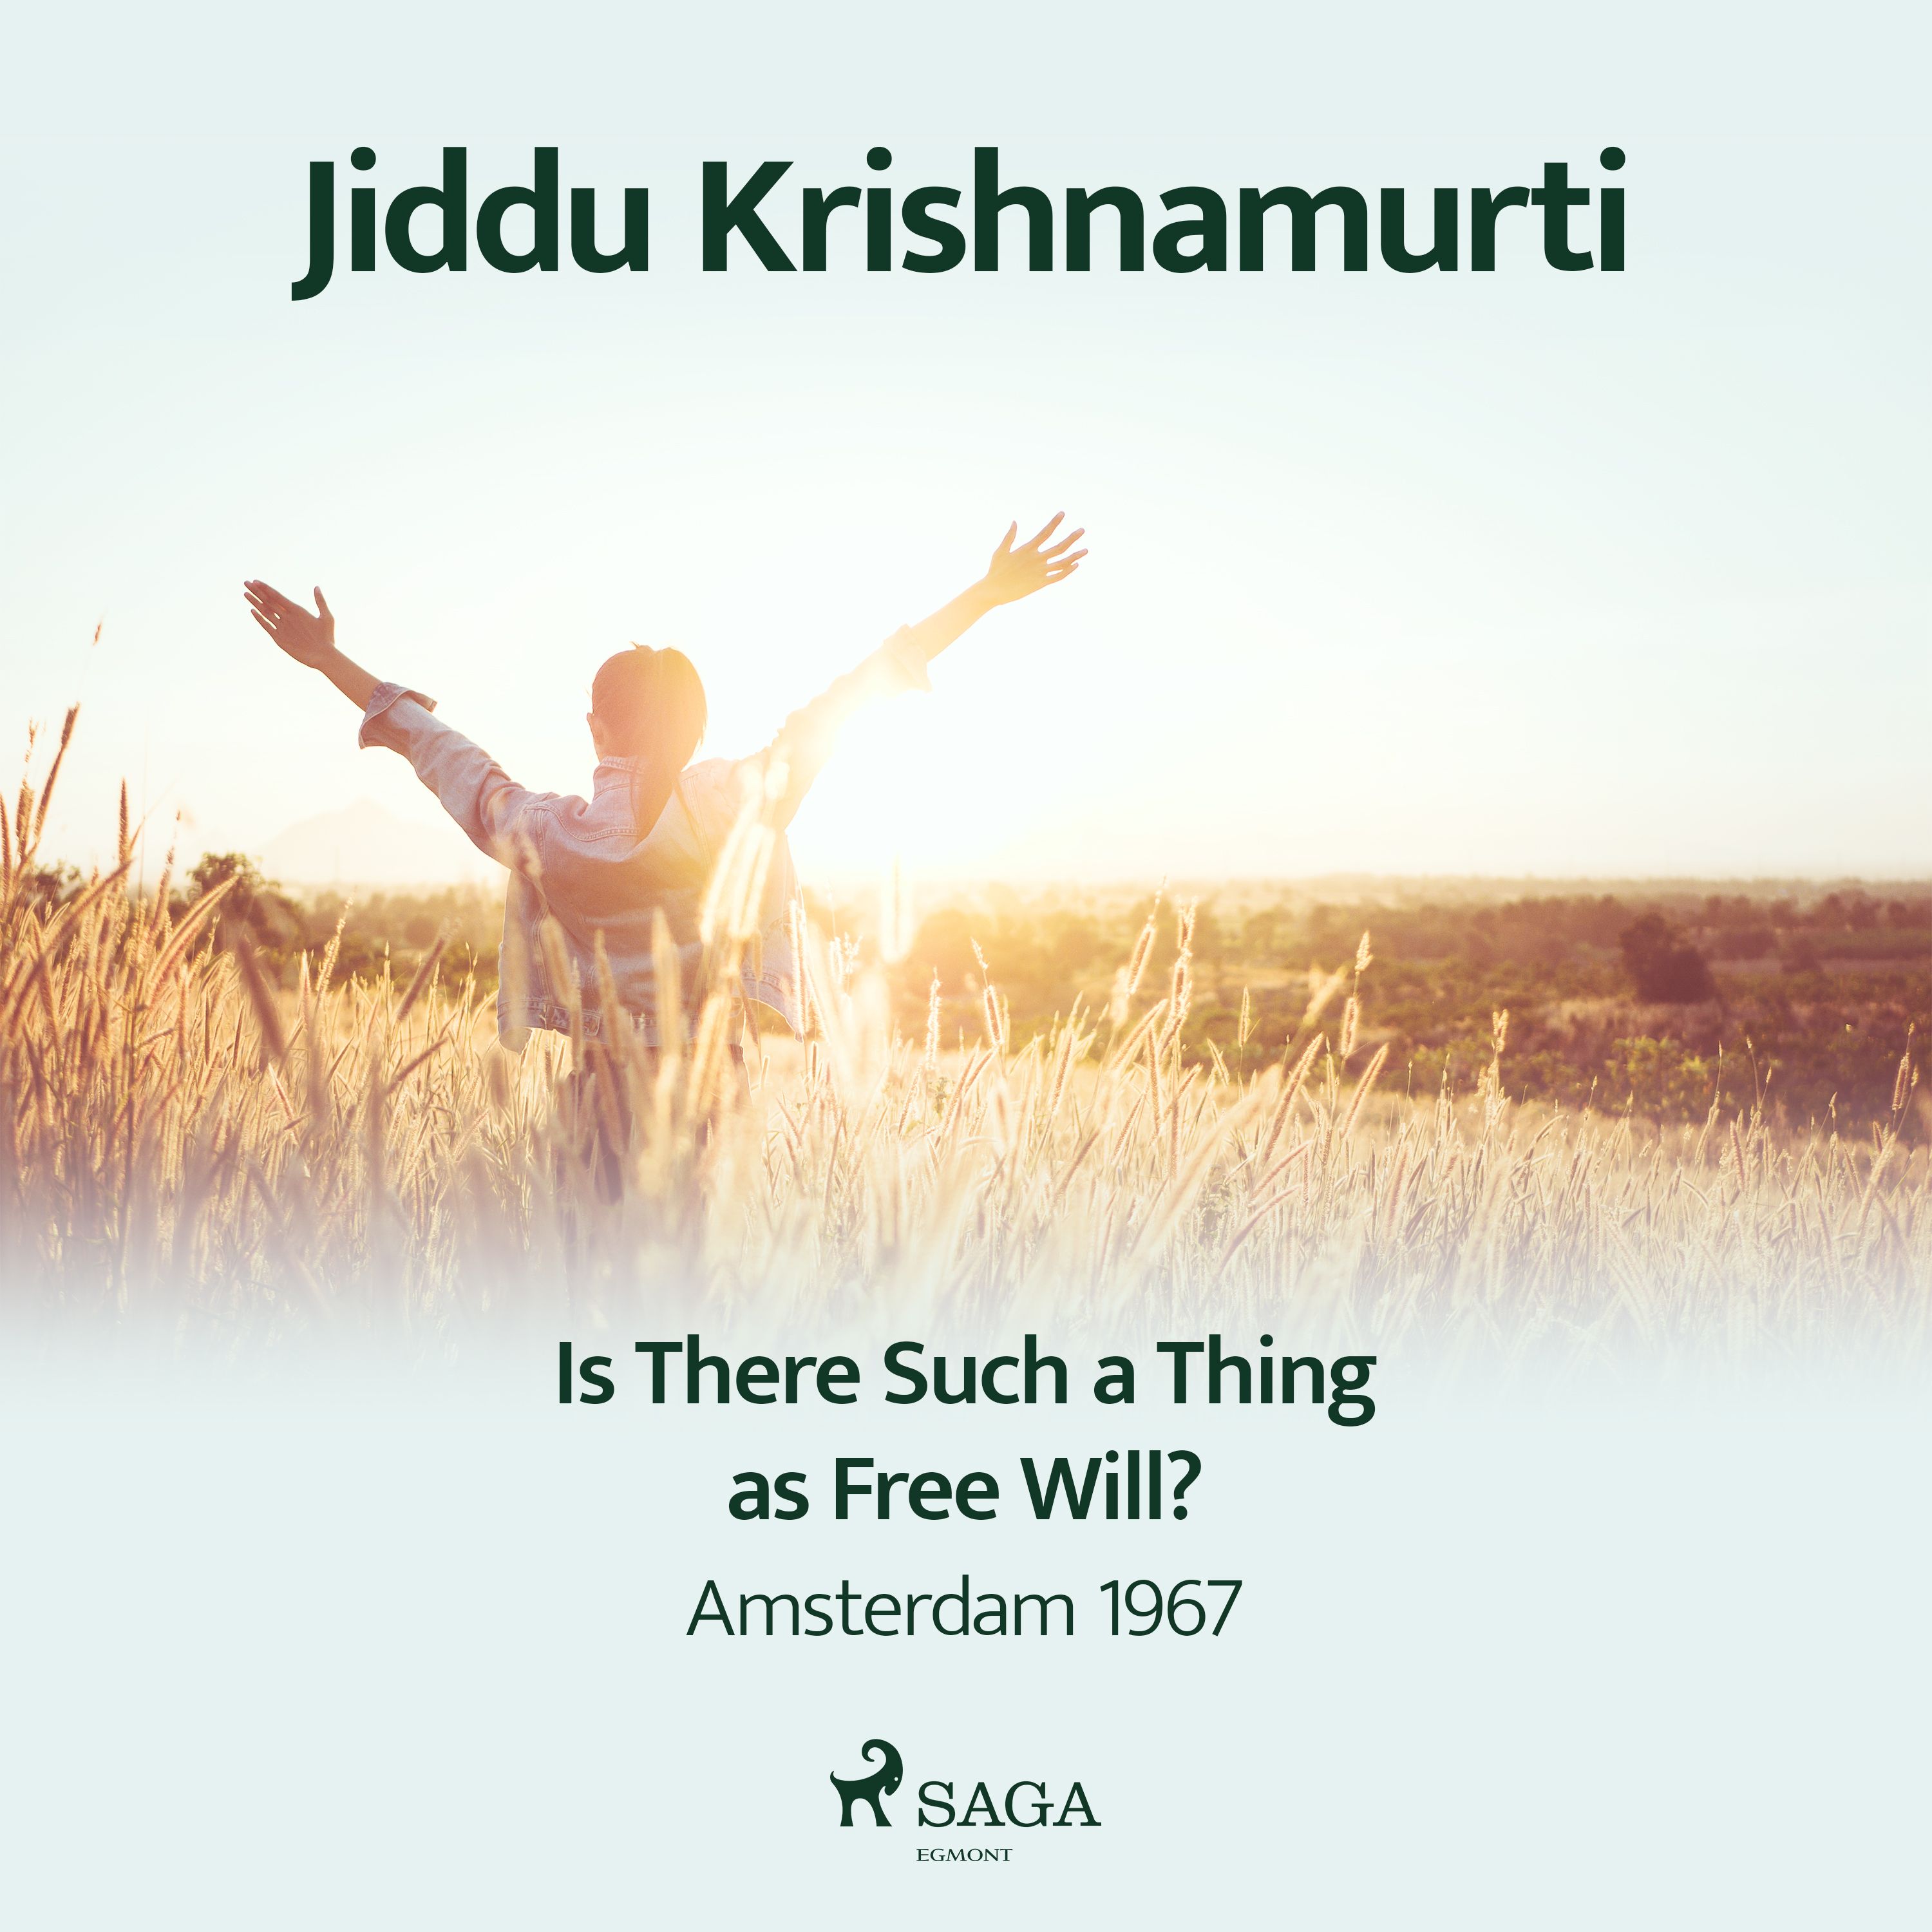 Is There Such a Thing as Free Will? – Amsterdam 1967, lydbog af Jiddu Krishnamurti